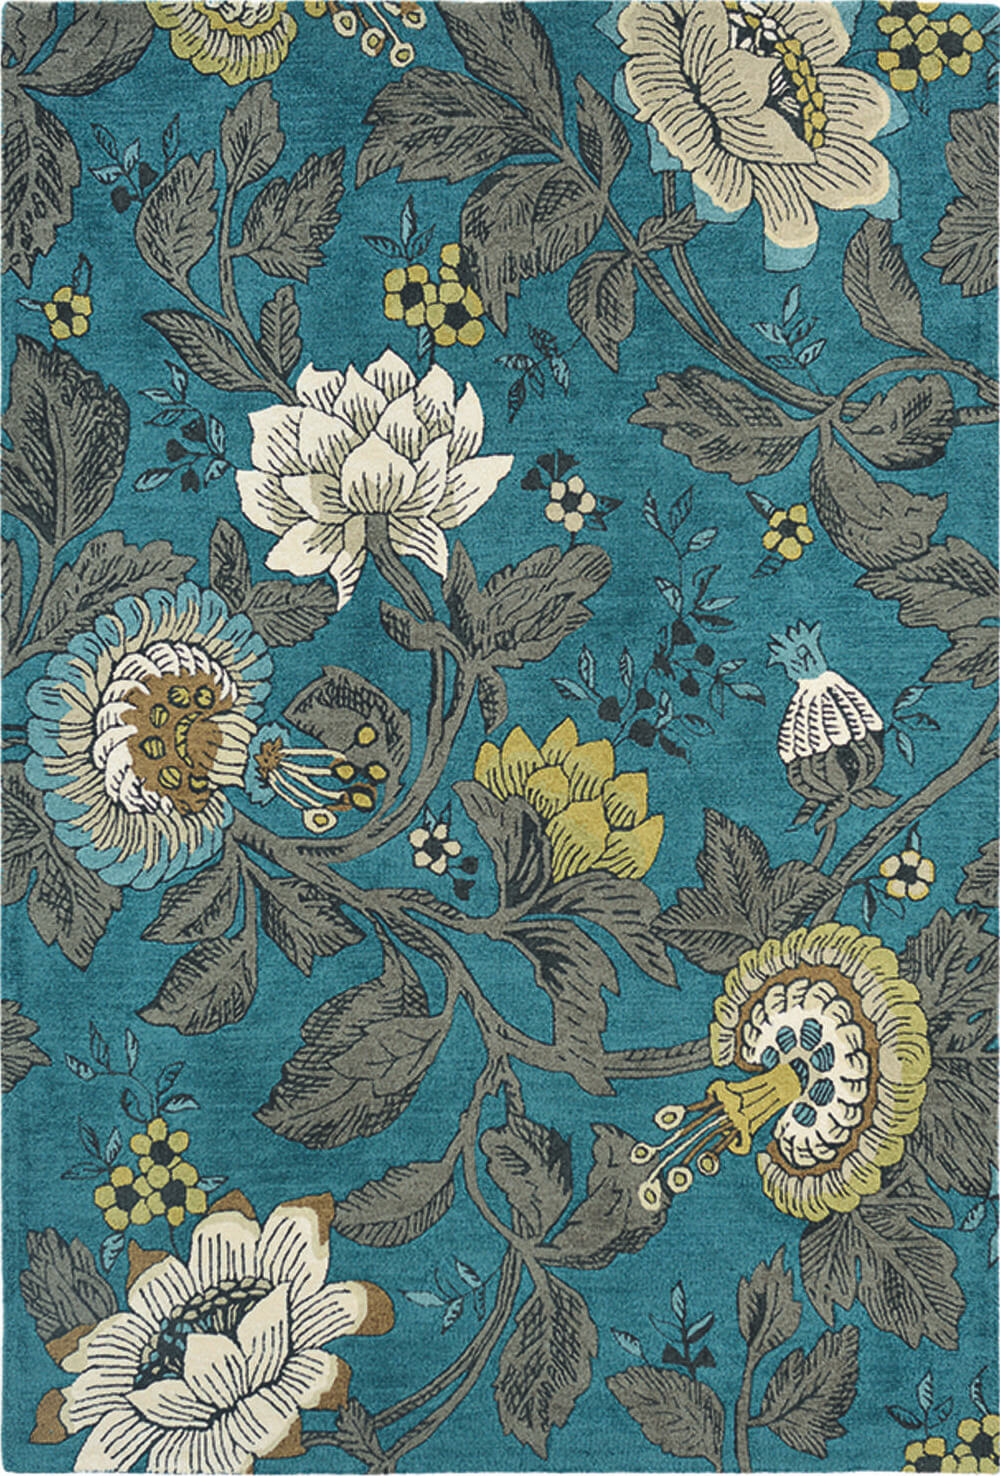 Passion Flower Teal 37117 Rug ☞ Size: 170 x 240 cm